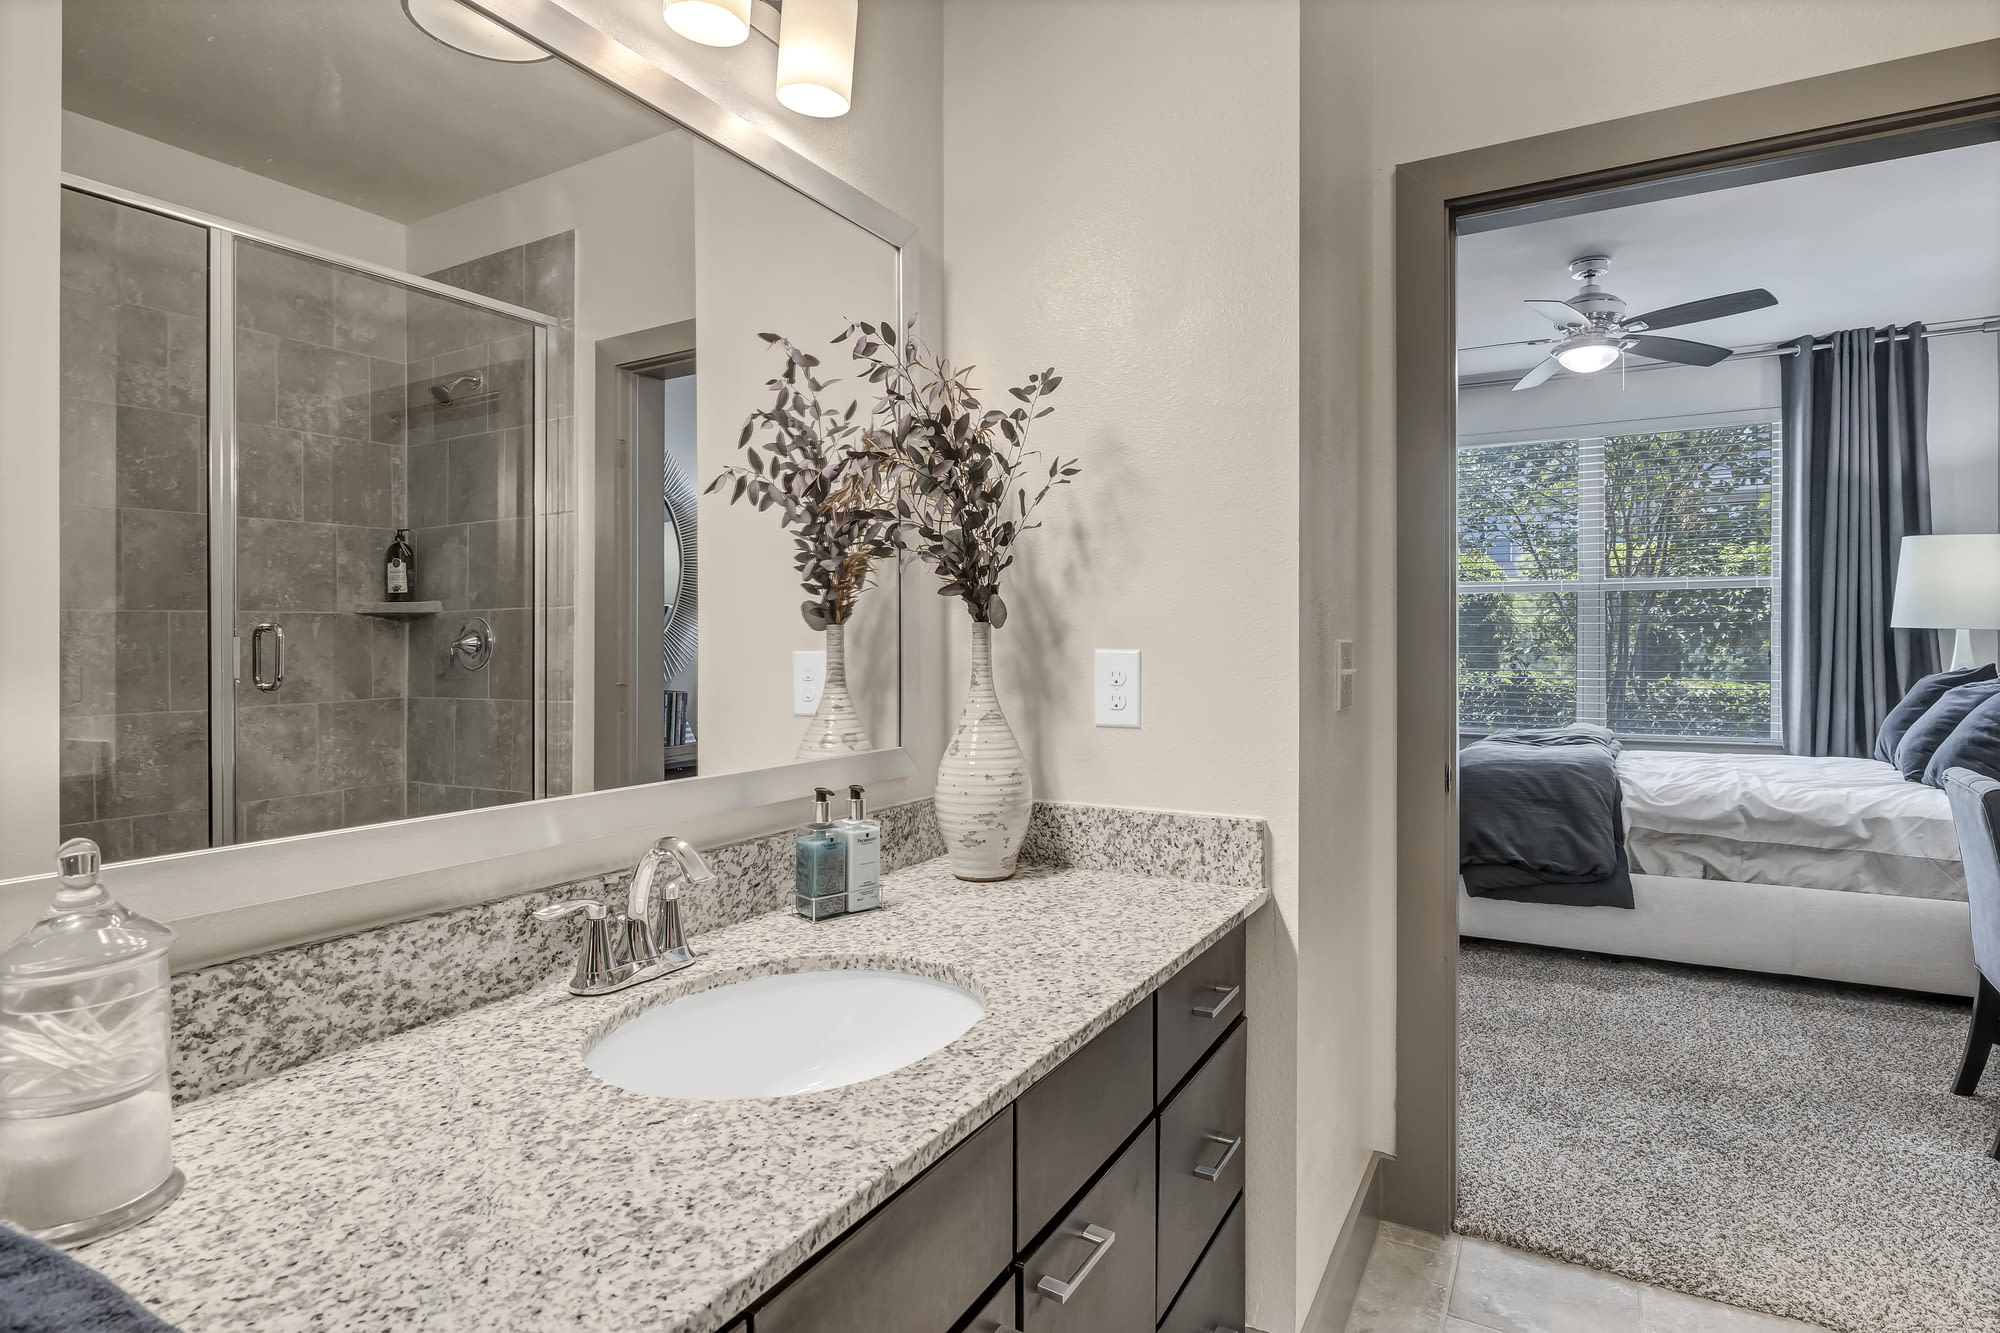 Bathroom with granite counter and tiled shower at Henley at The Rim in San Antonio, Texas